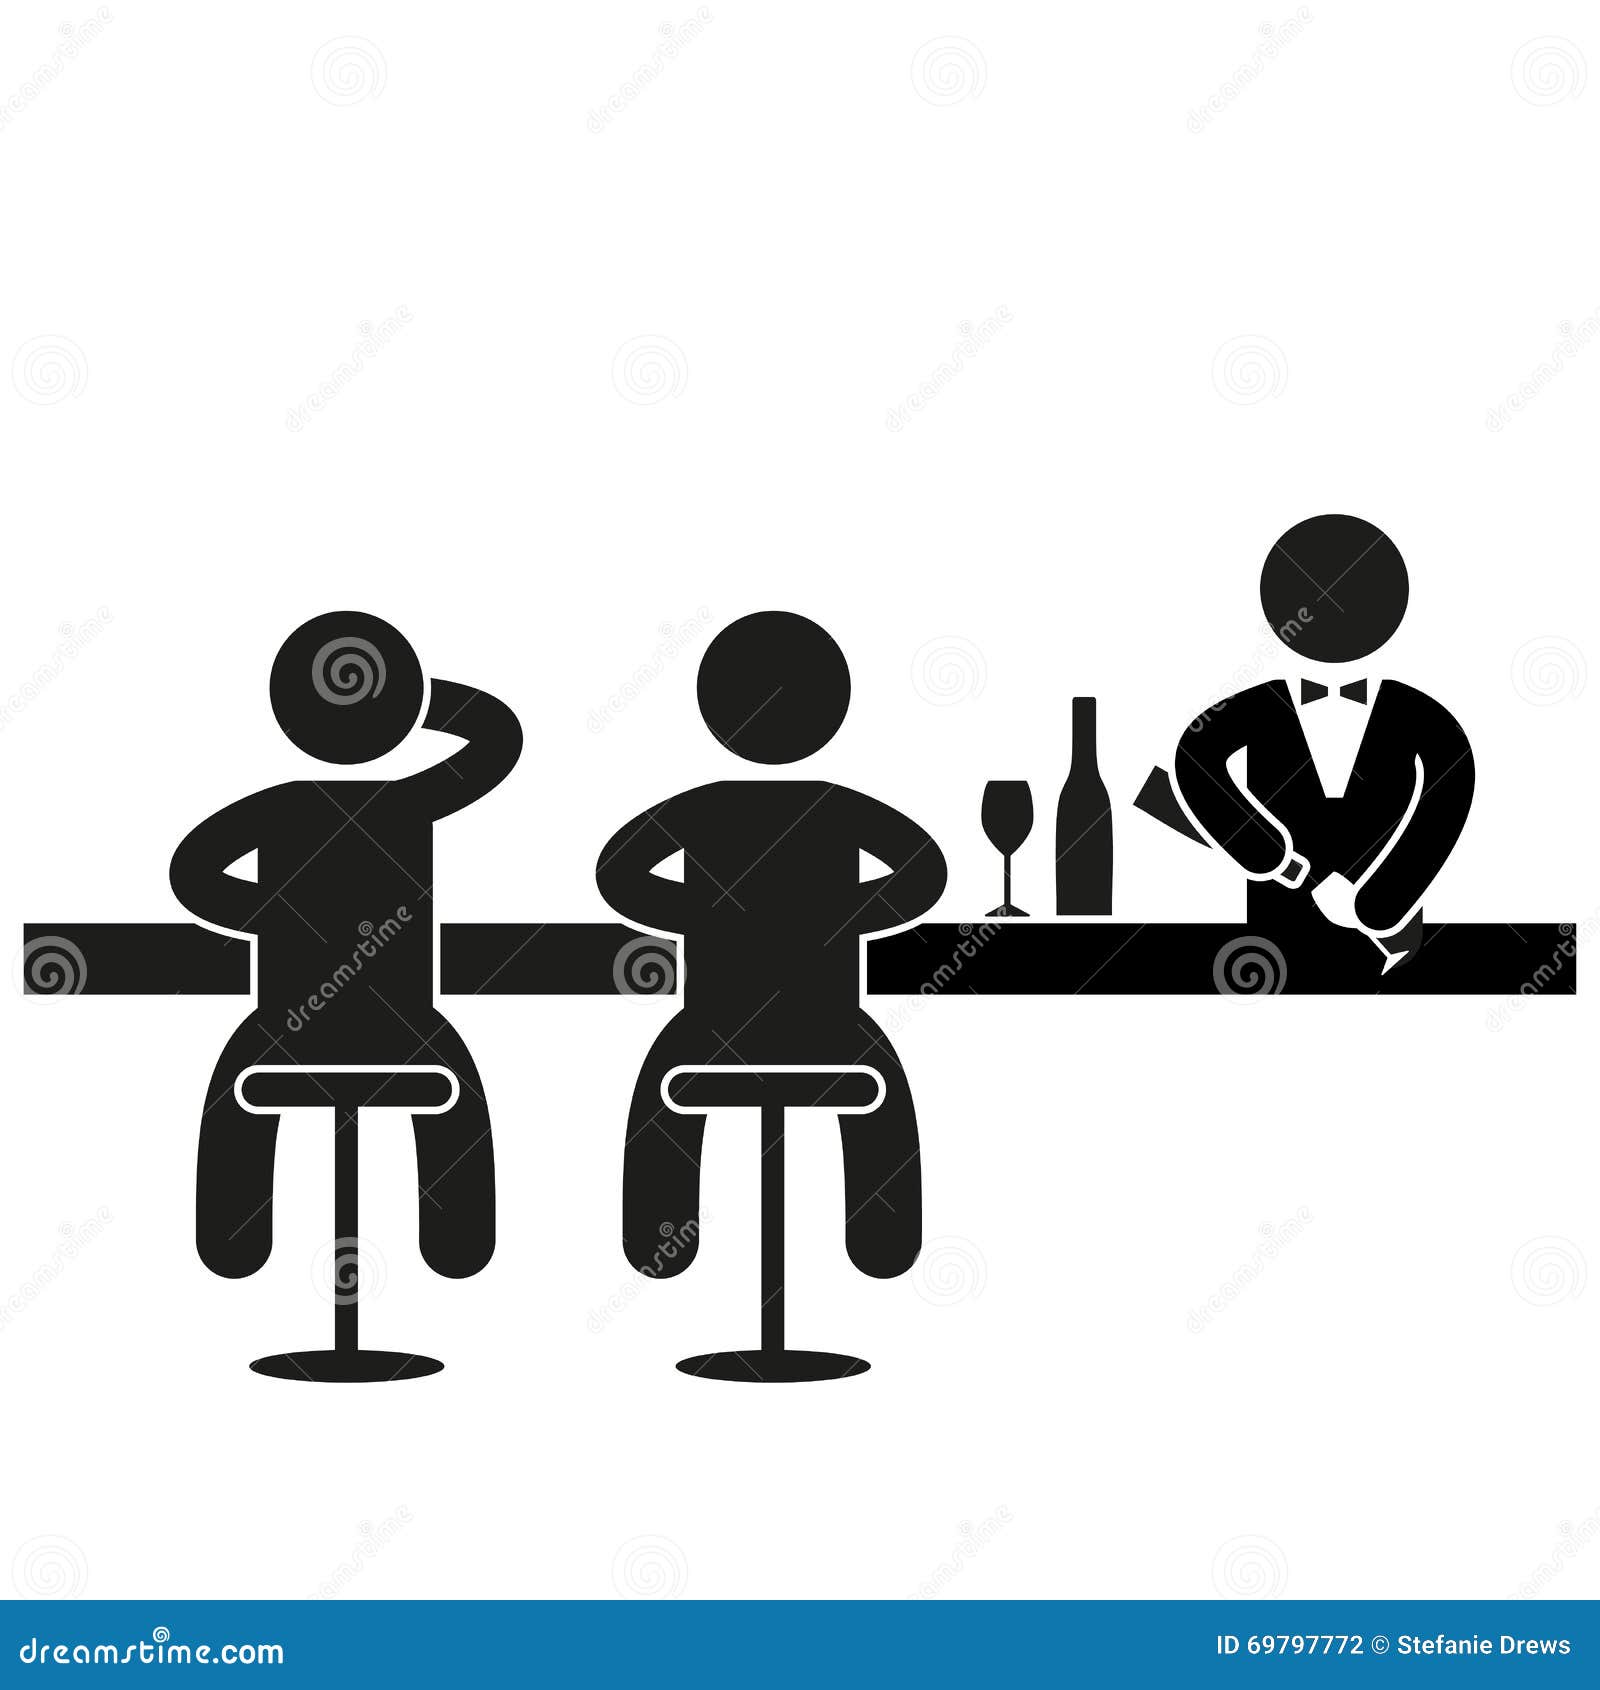 black and white Pictogram for a bar with people.